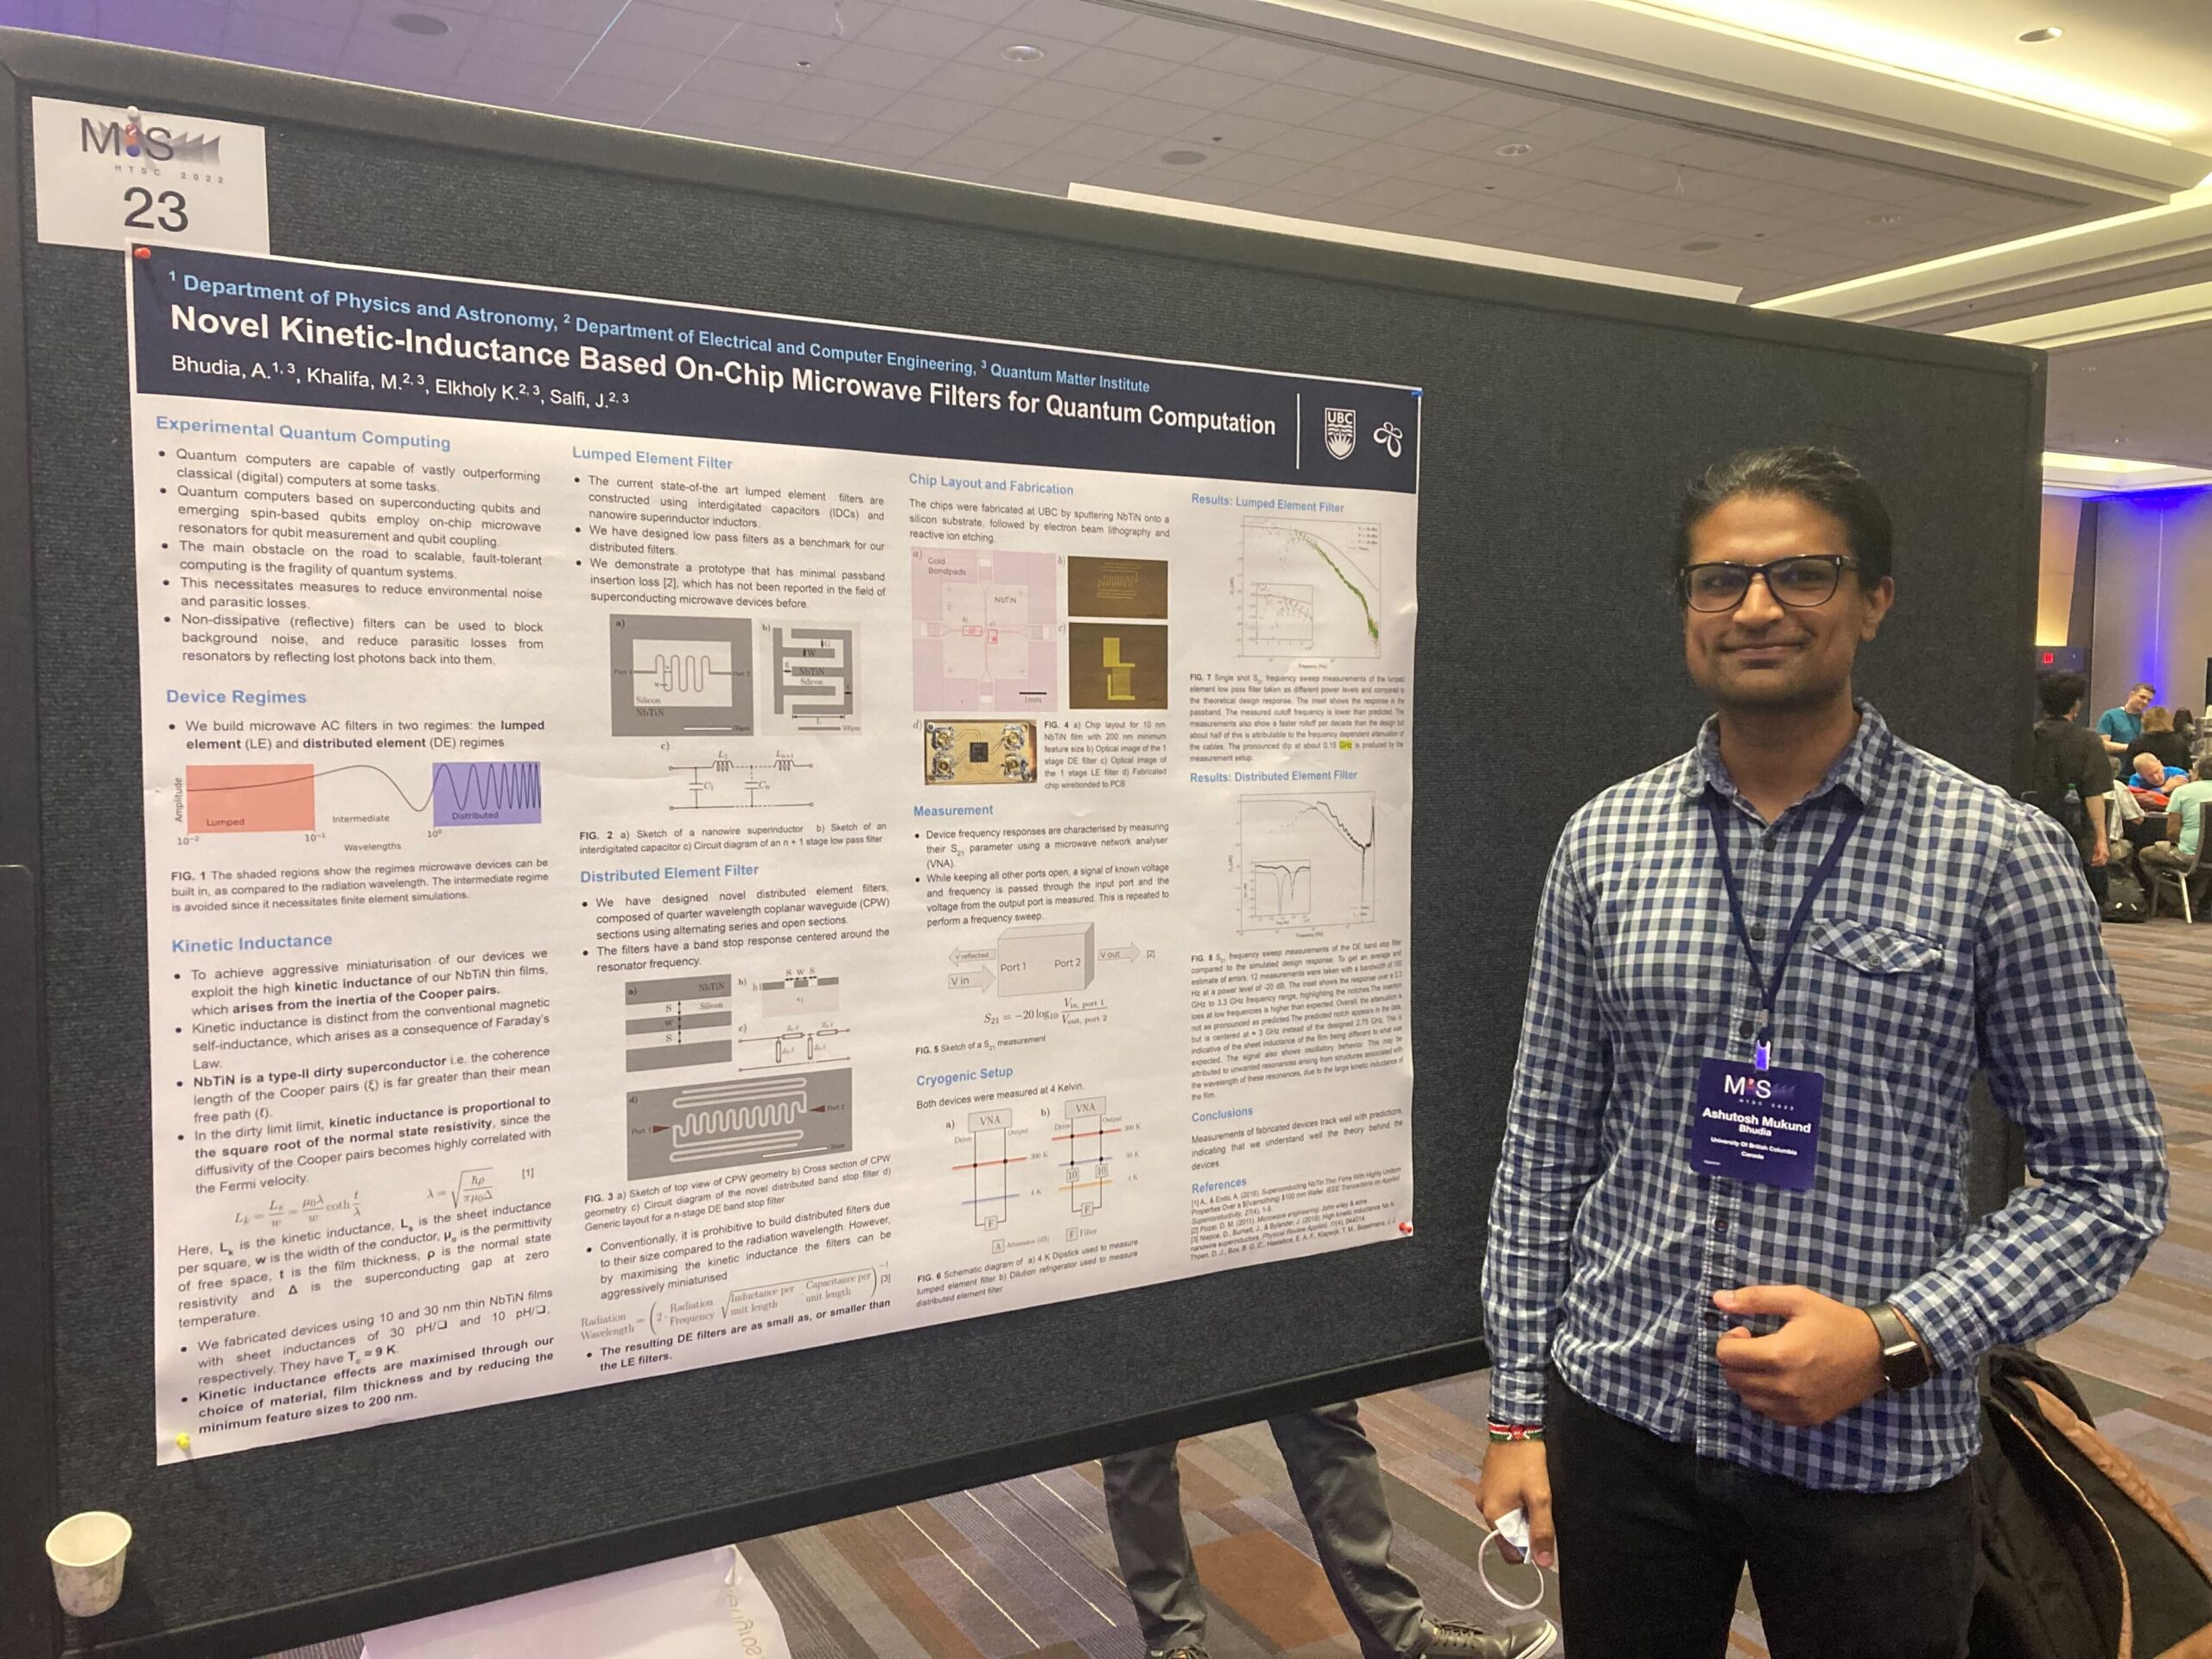 Bhudia presents his work on superconducting quantum devices at M2S